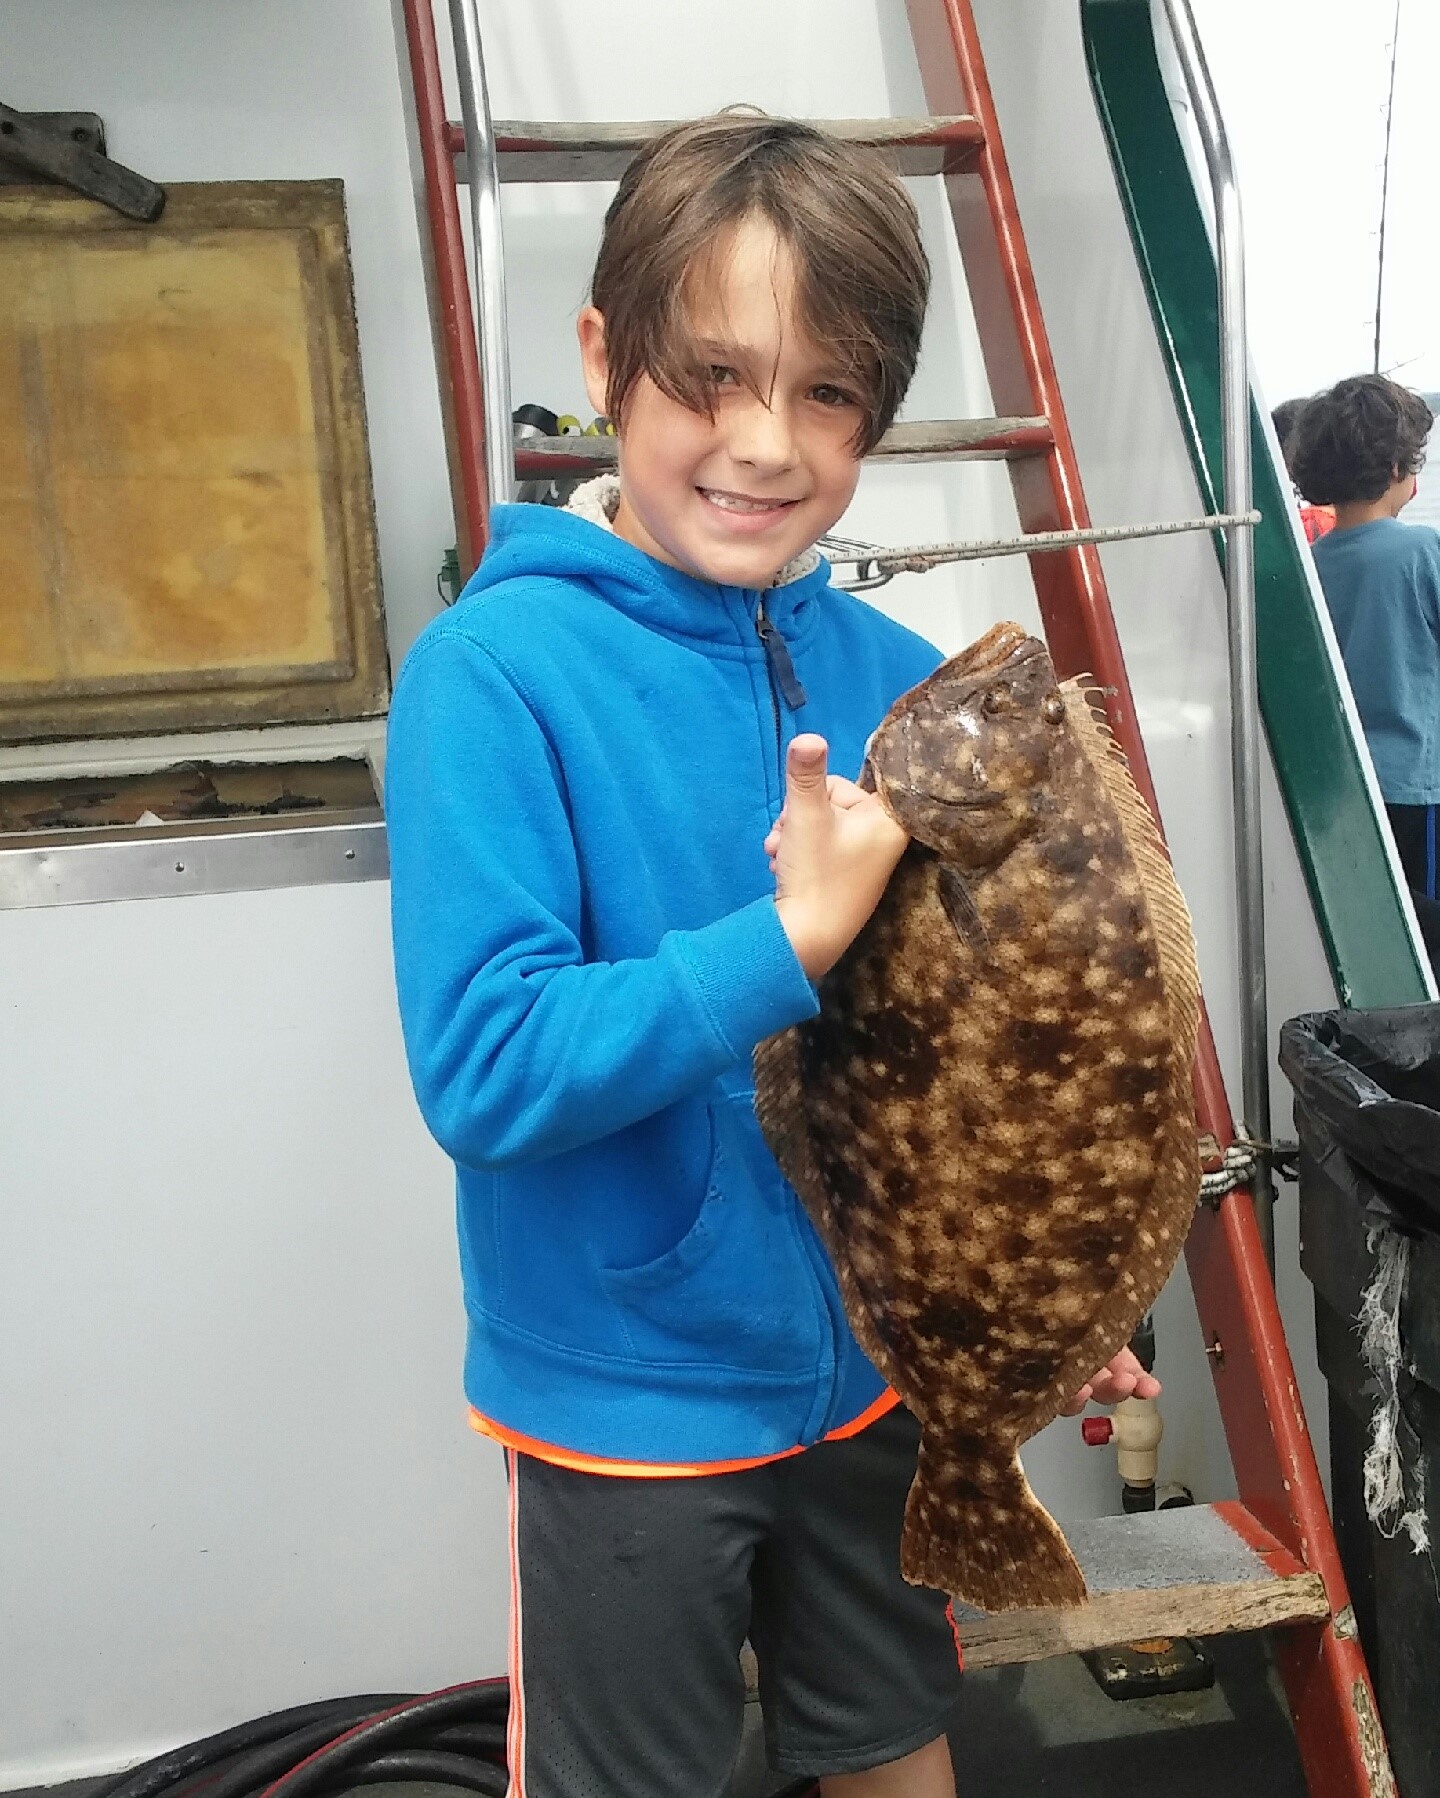 Noah Blasi of Warwick with the 22” summer flounder (fluke) he caught at the RI Saltwater Anglers Association fishing camp.